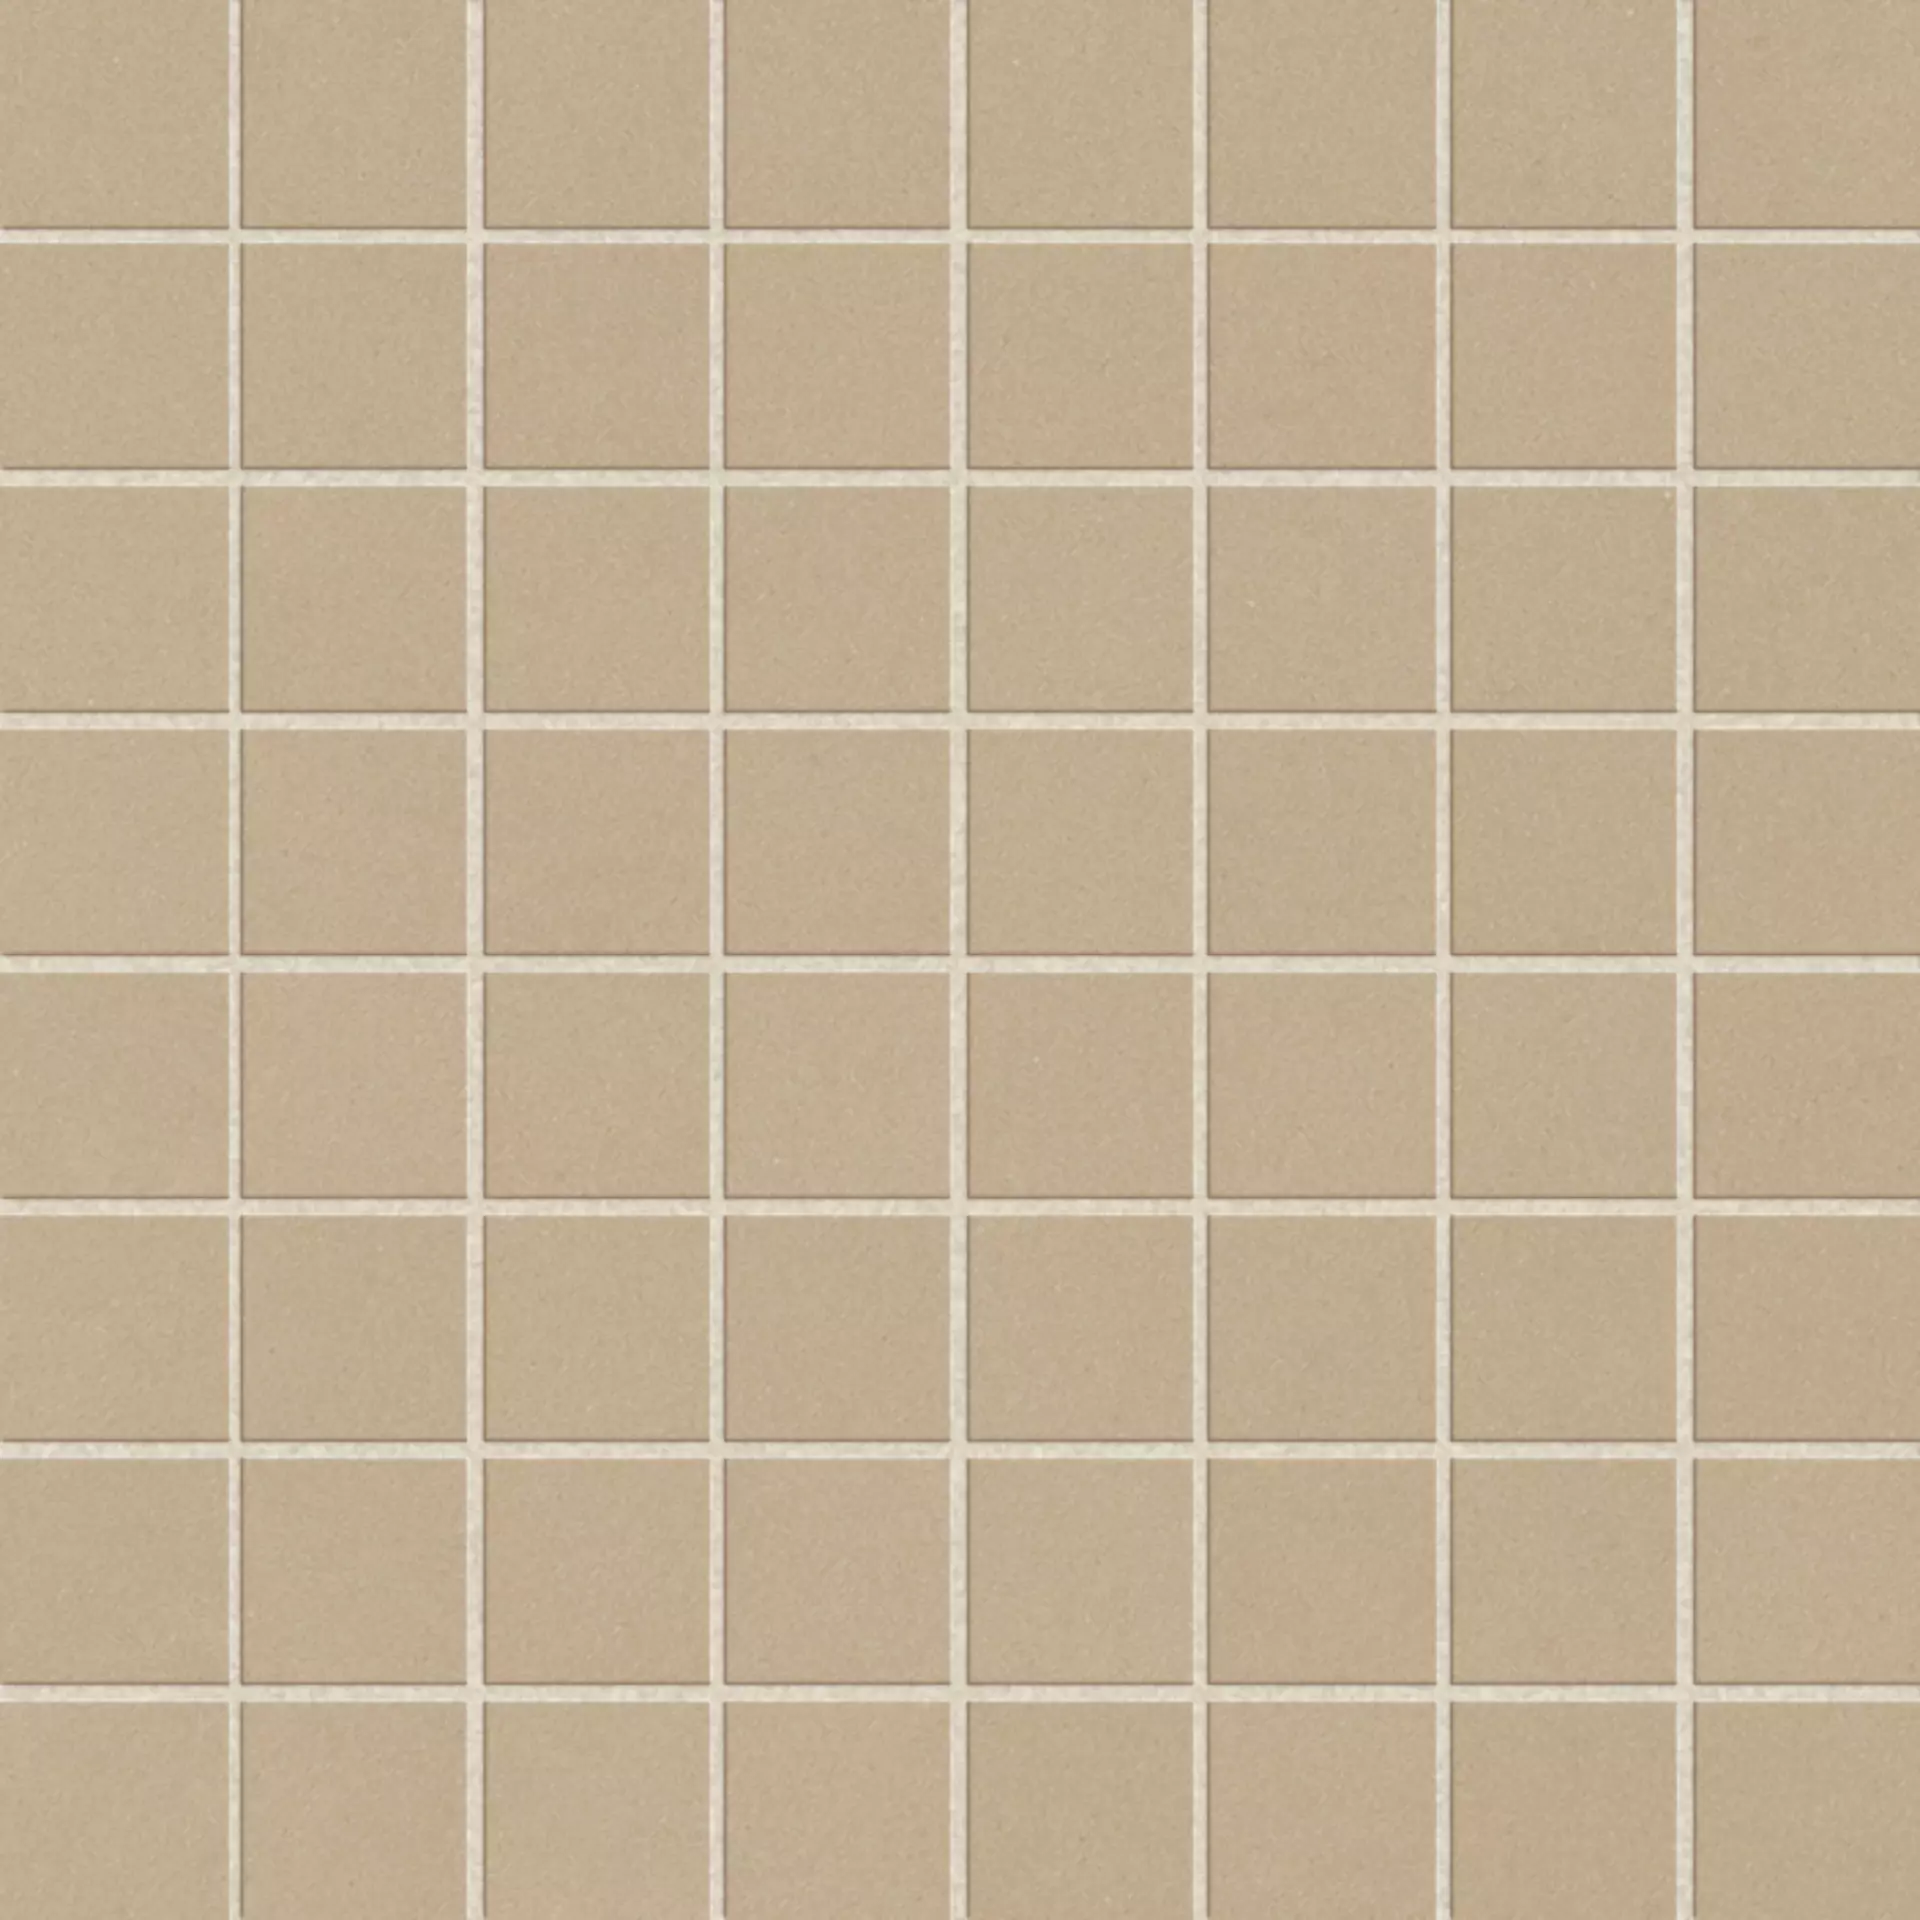 Margres Time 2.0 Beige Polished Antibacterial Mosaic 3,5x3,5 B25M33T246F 30x30cm rectified 10,5mm